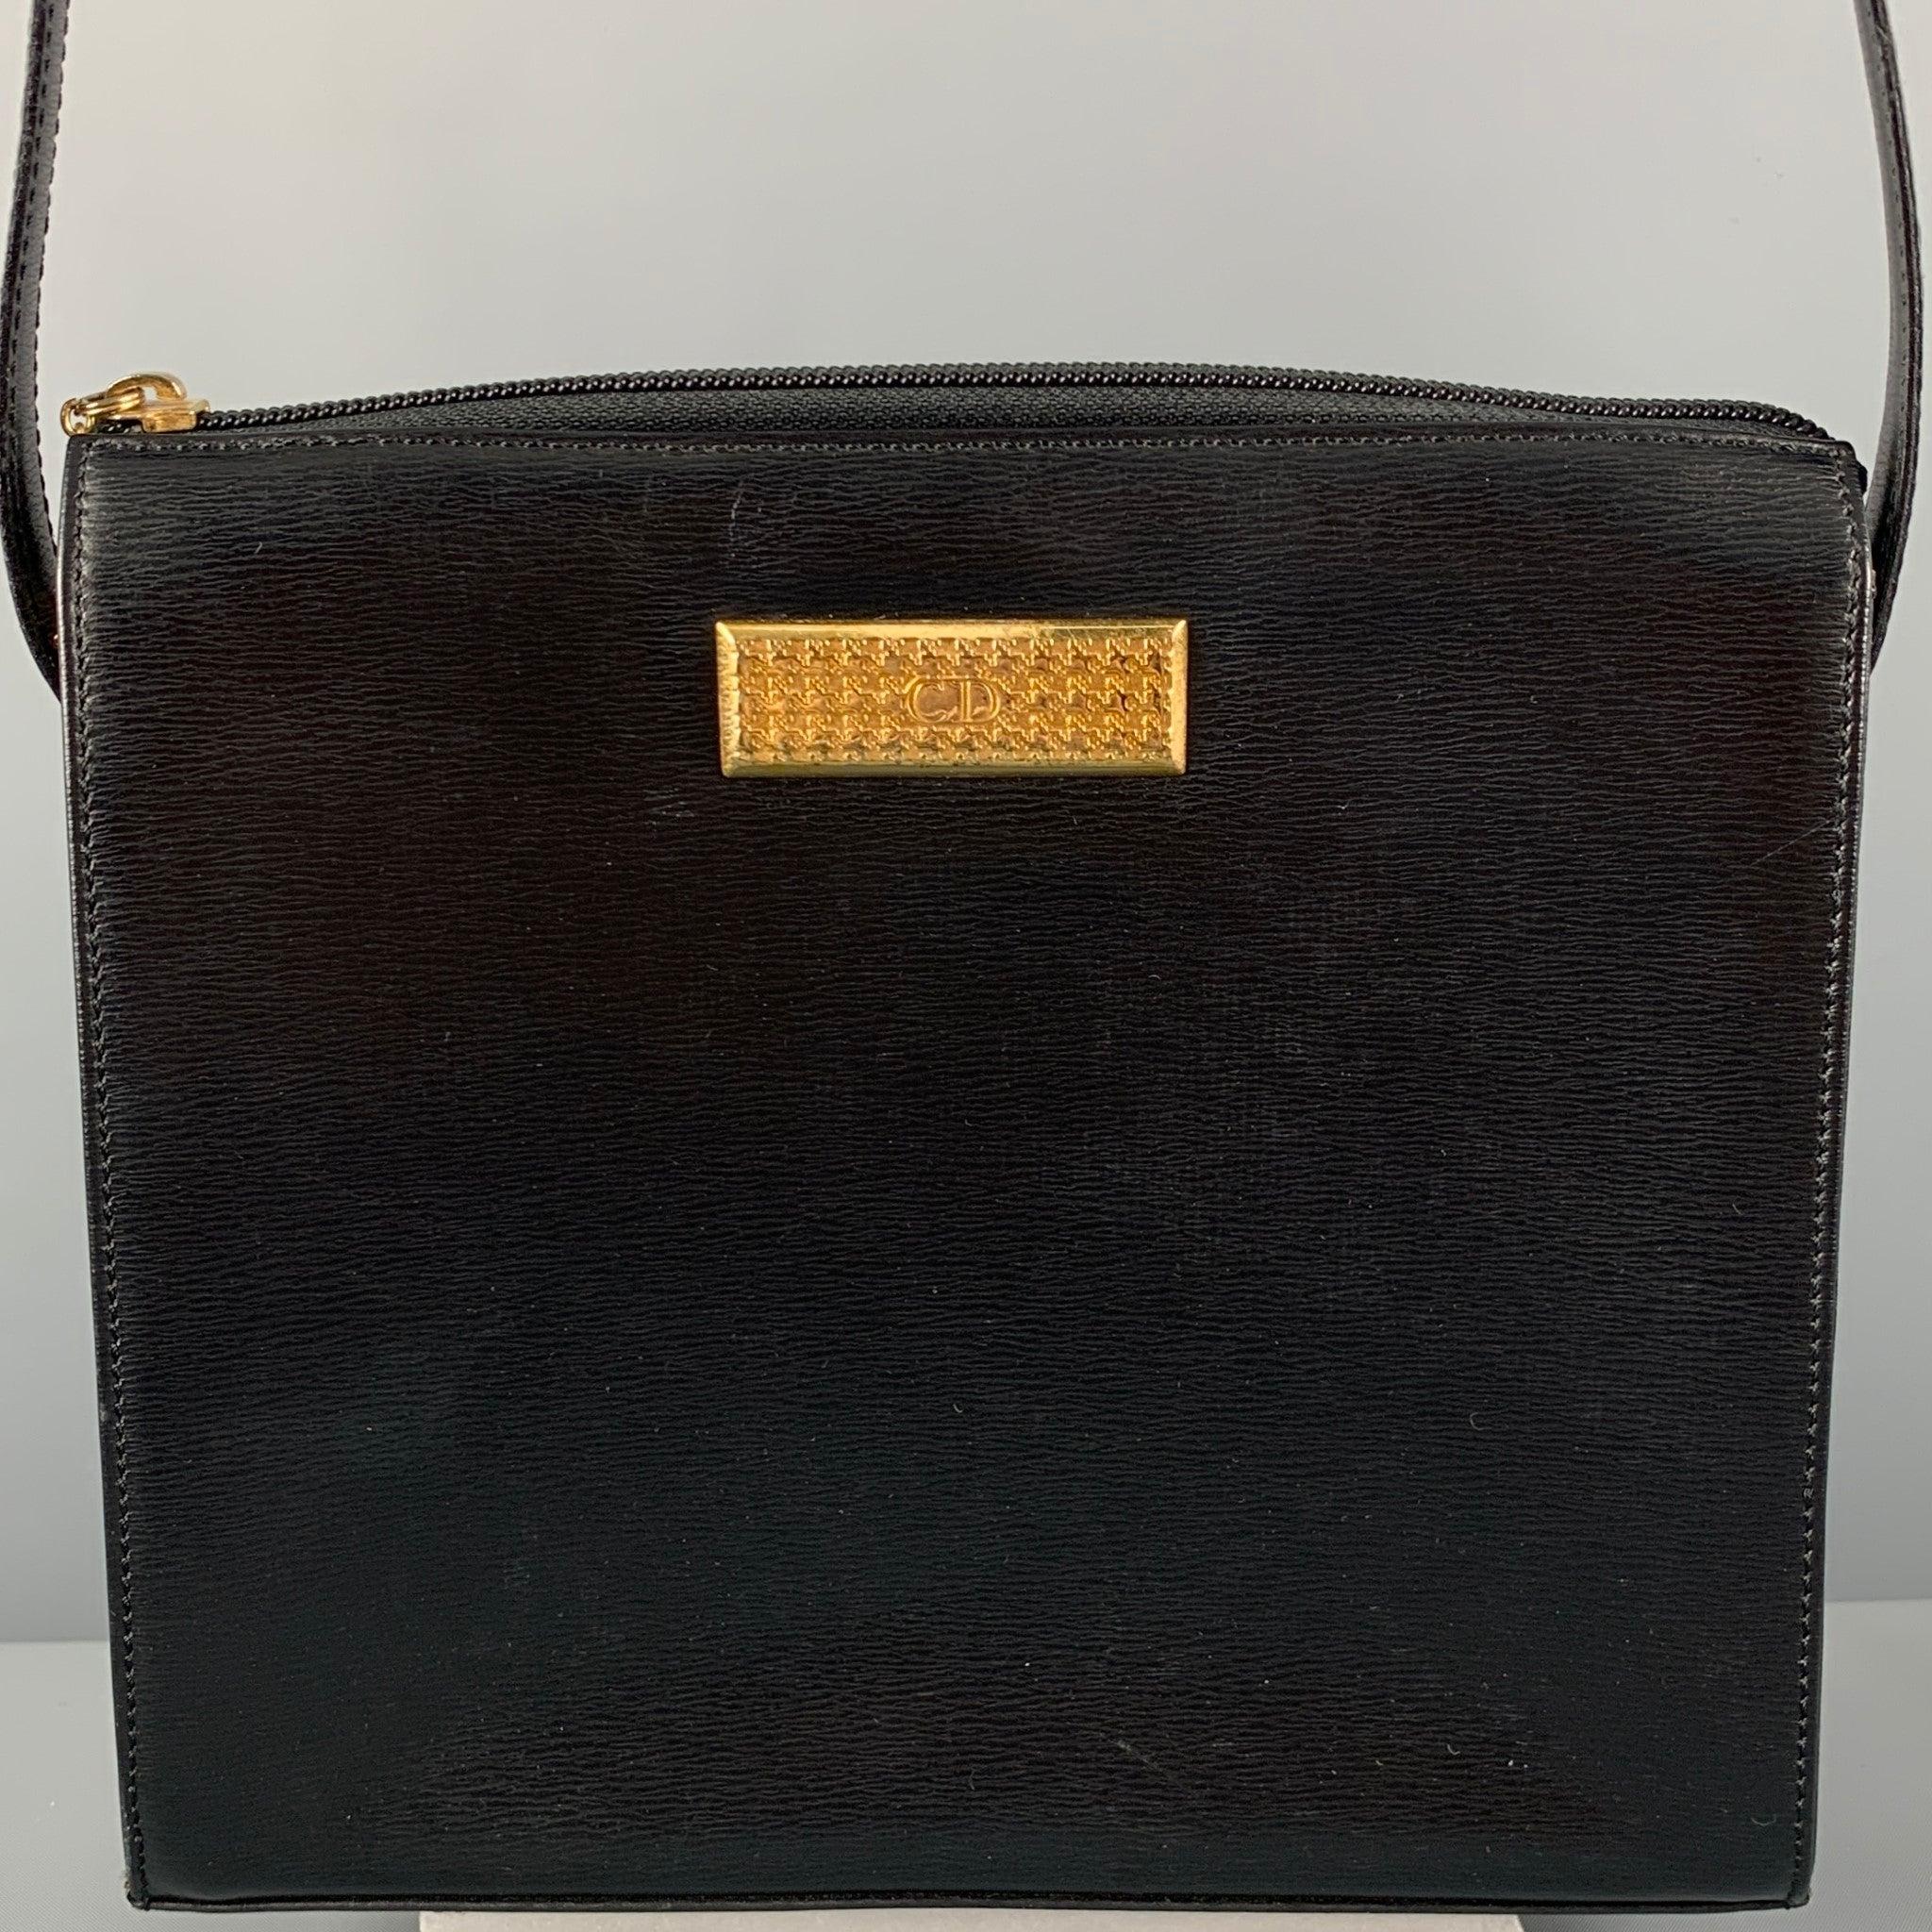 Vintage CHRISTIAN DIOR handbag comes in a black leather featuring a shoulder strap, inner pocket, and a zipper closure. Made in France. Very Good Pre-Owned Condition. Minor signs of wear. 

Measurements: 
  Length: 9 inches Width: 2.75 inches